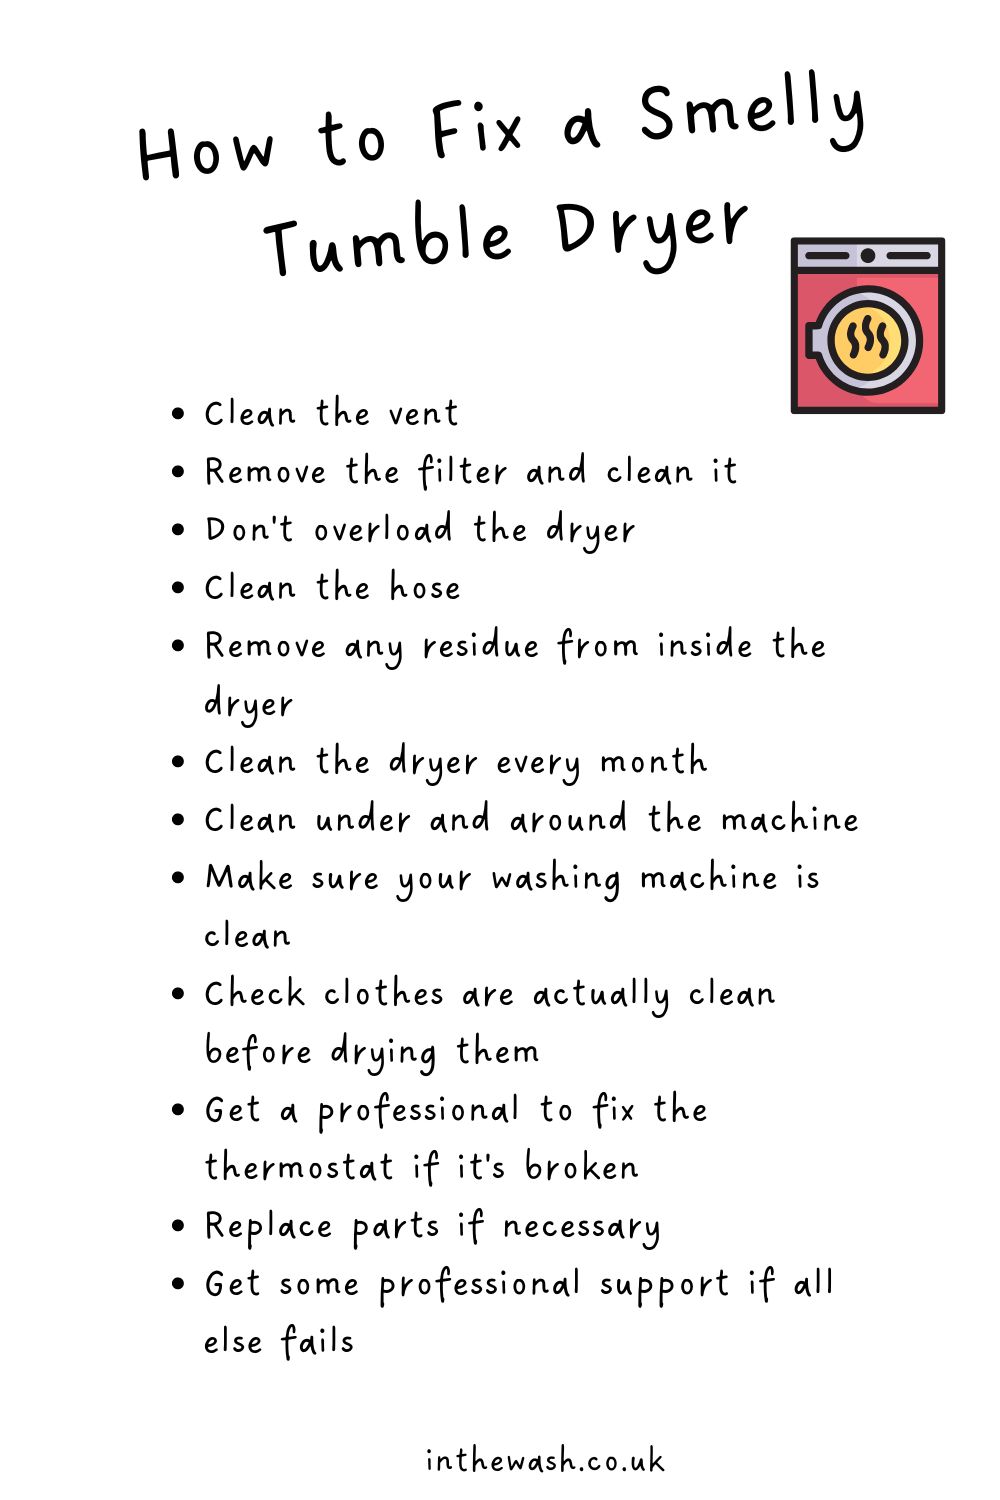 How to fix a smelly tumble dryer